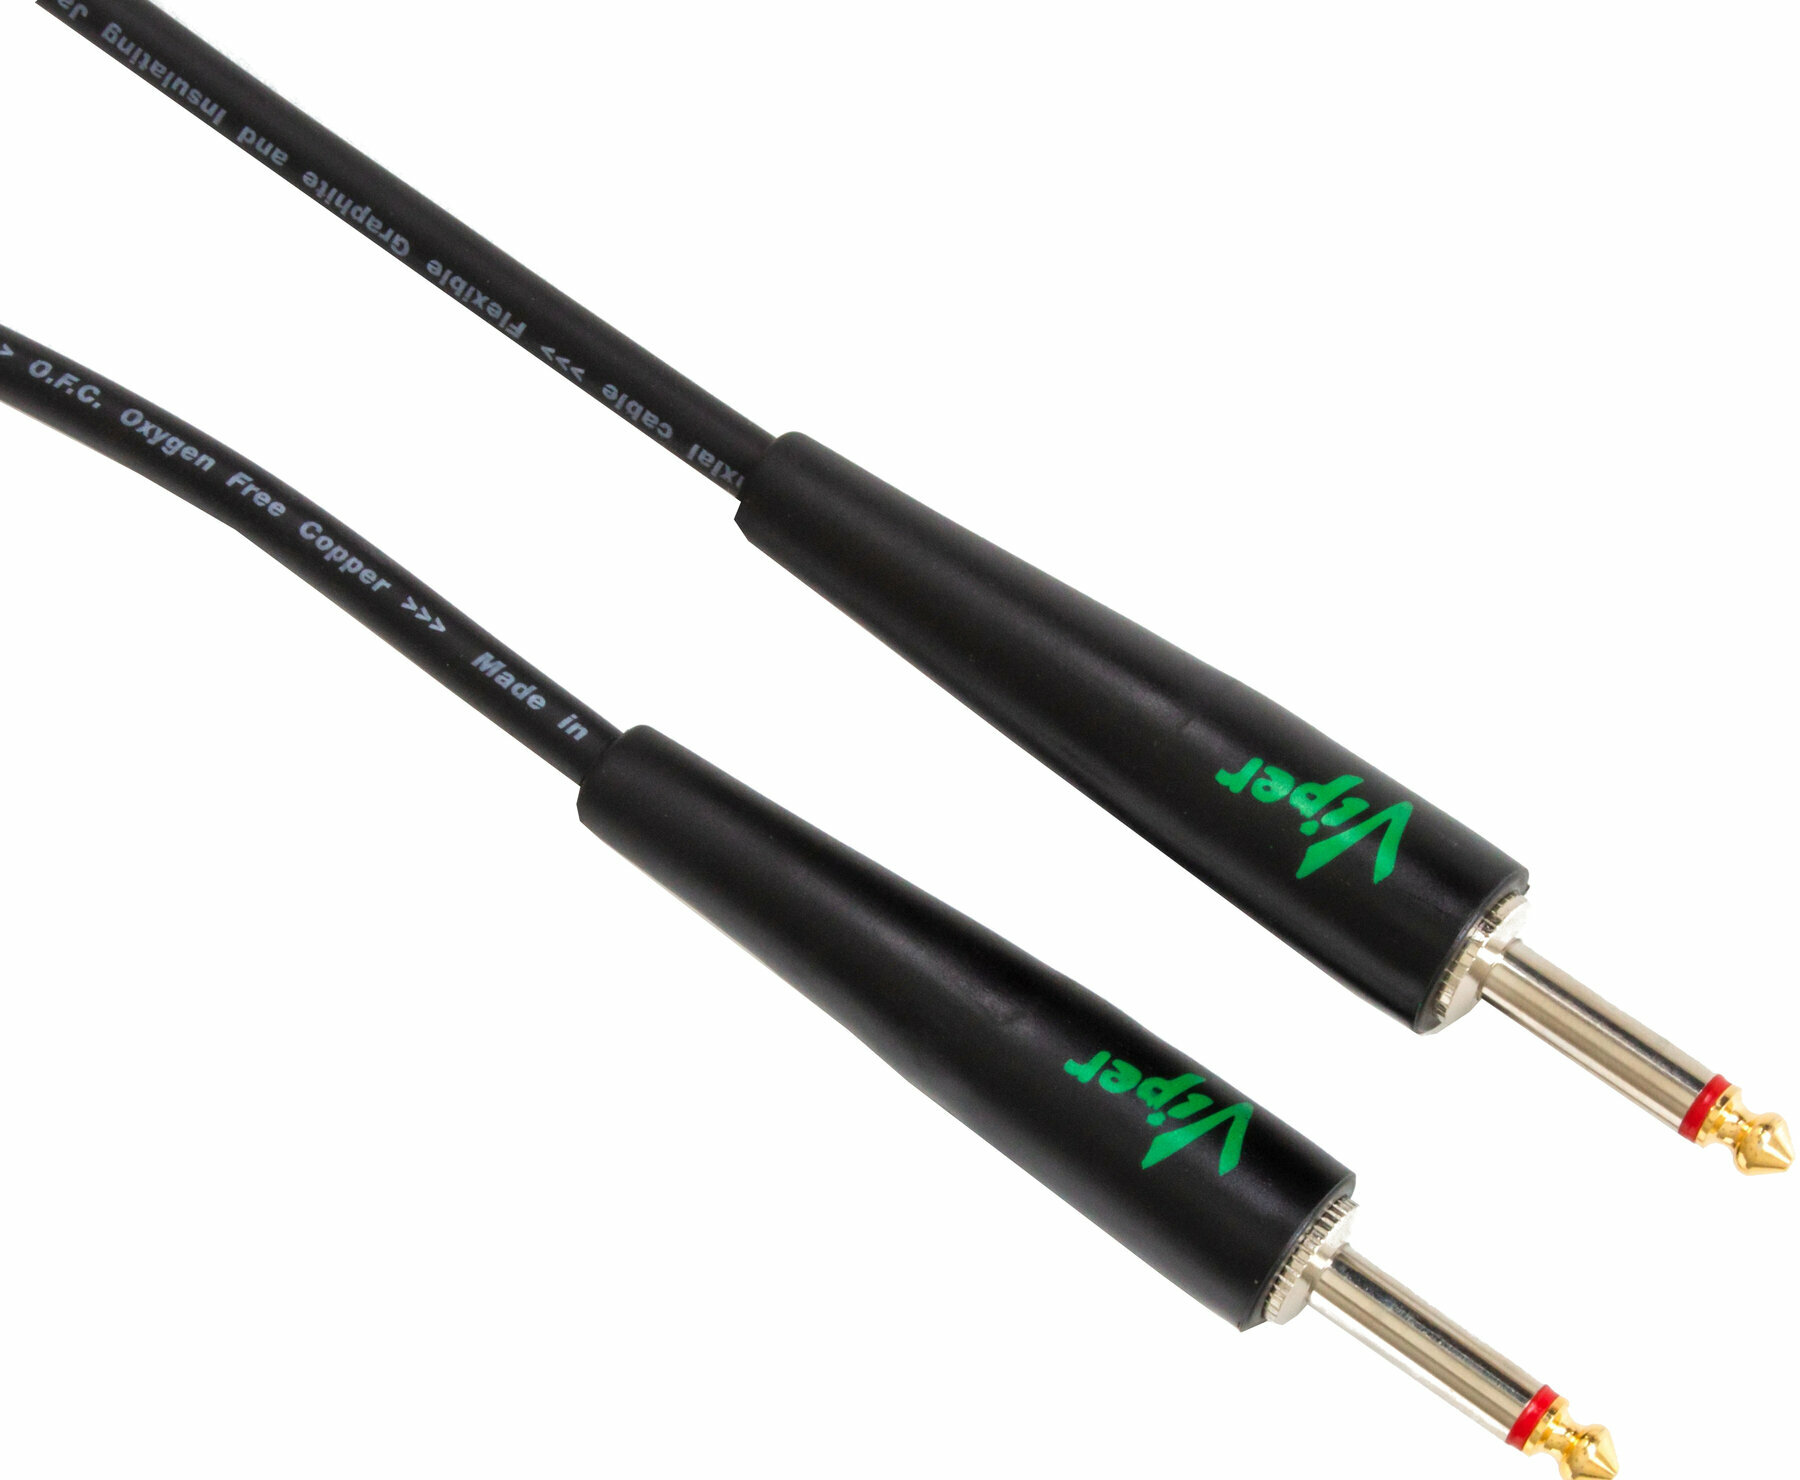 Adapter/Patch Cable Bespeco VIPER 30 Black 30 cm Straight - Straight